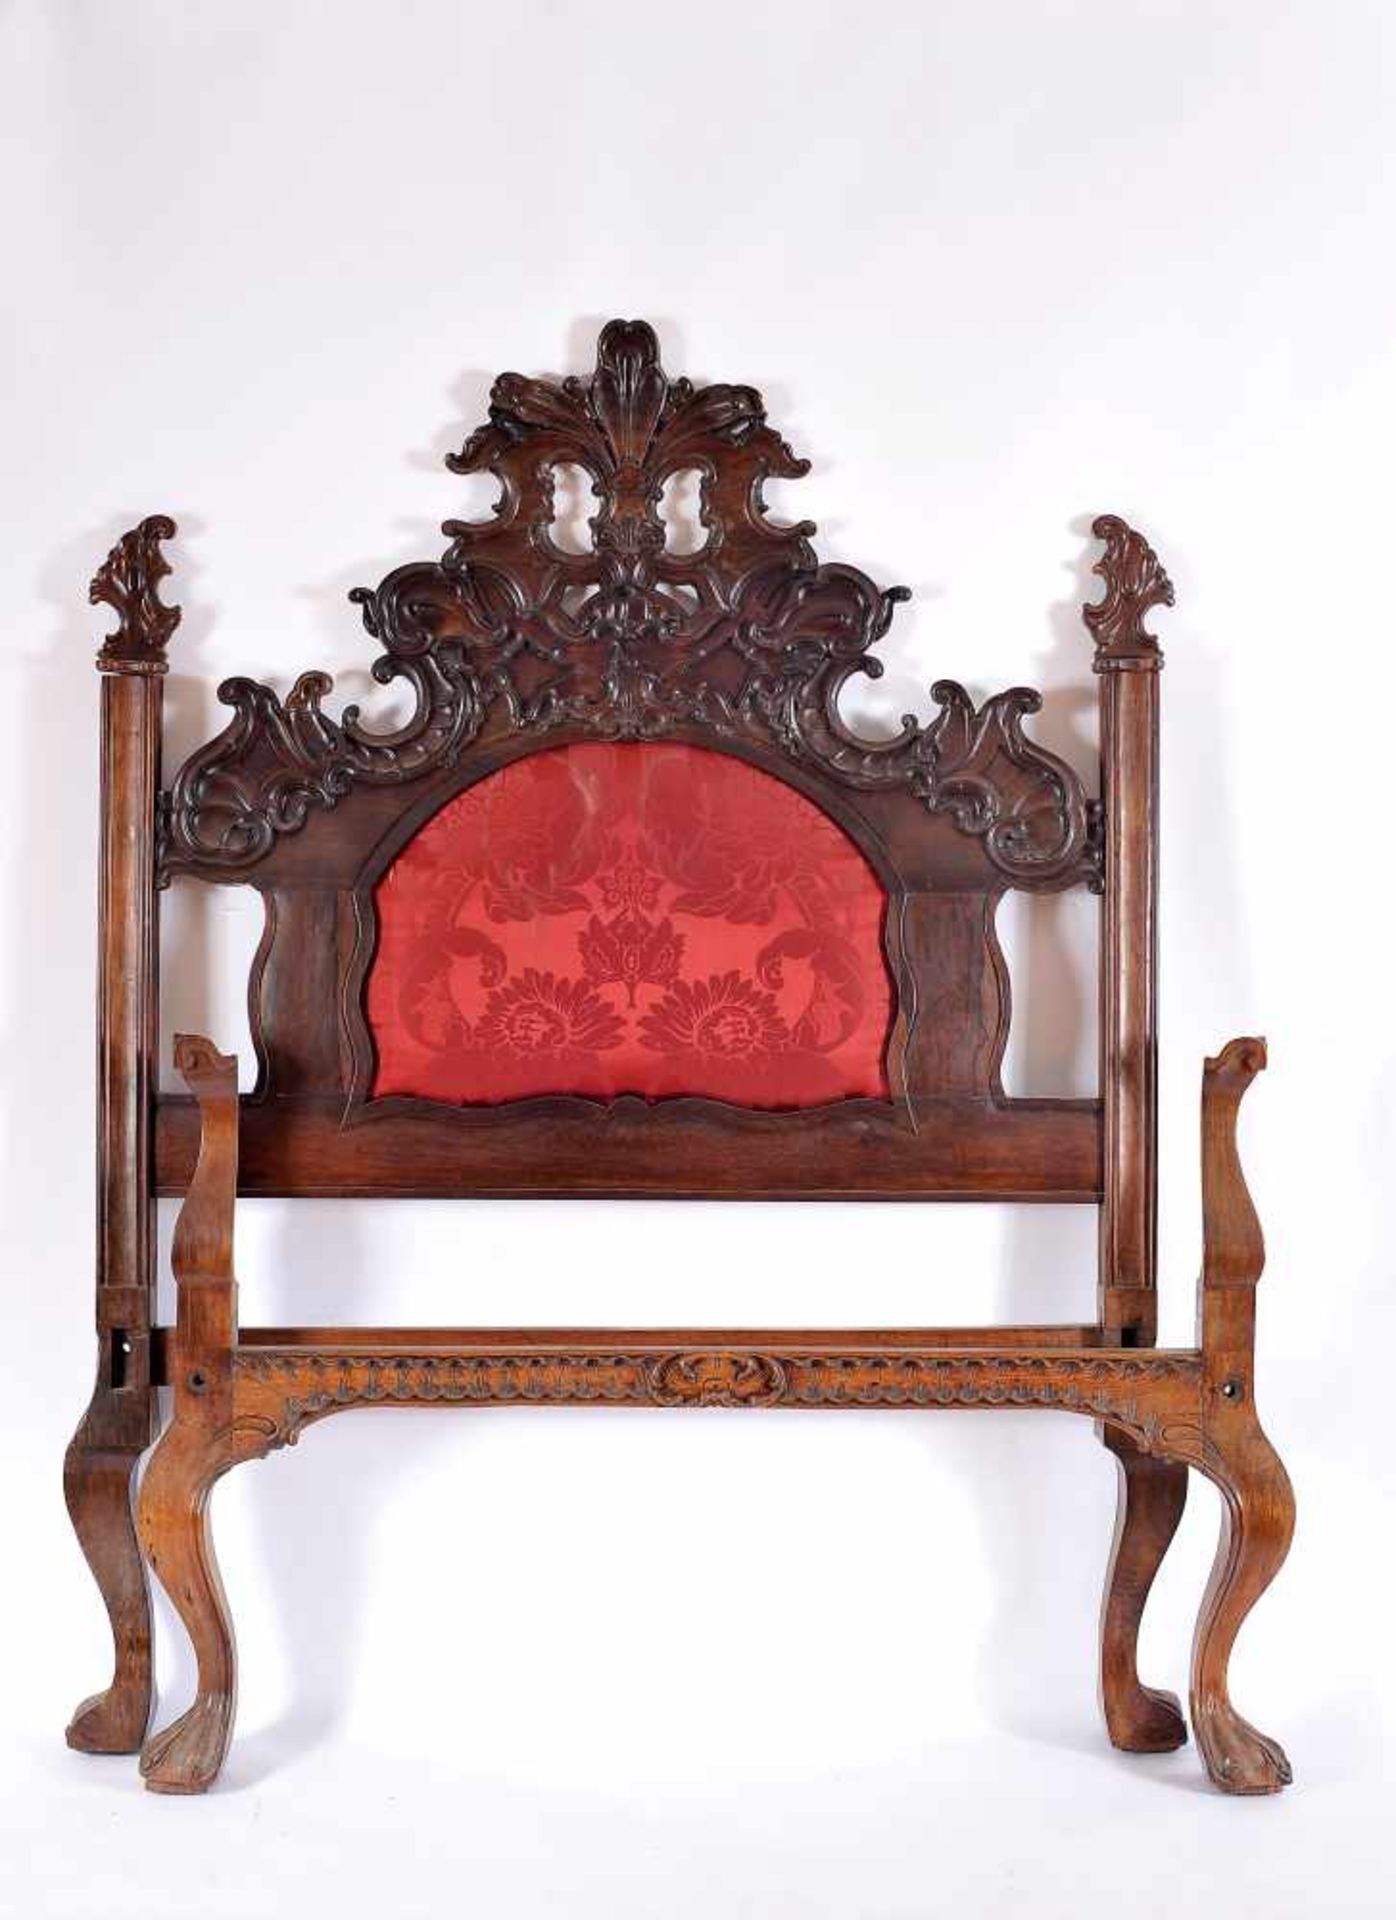 A Bed, D. José I, King of Portugal (1750-1777), carved Brazilian rosewood, backrest with upholstered